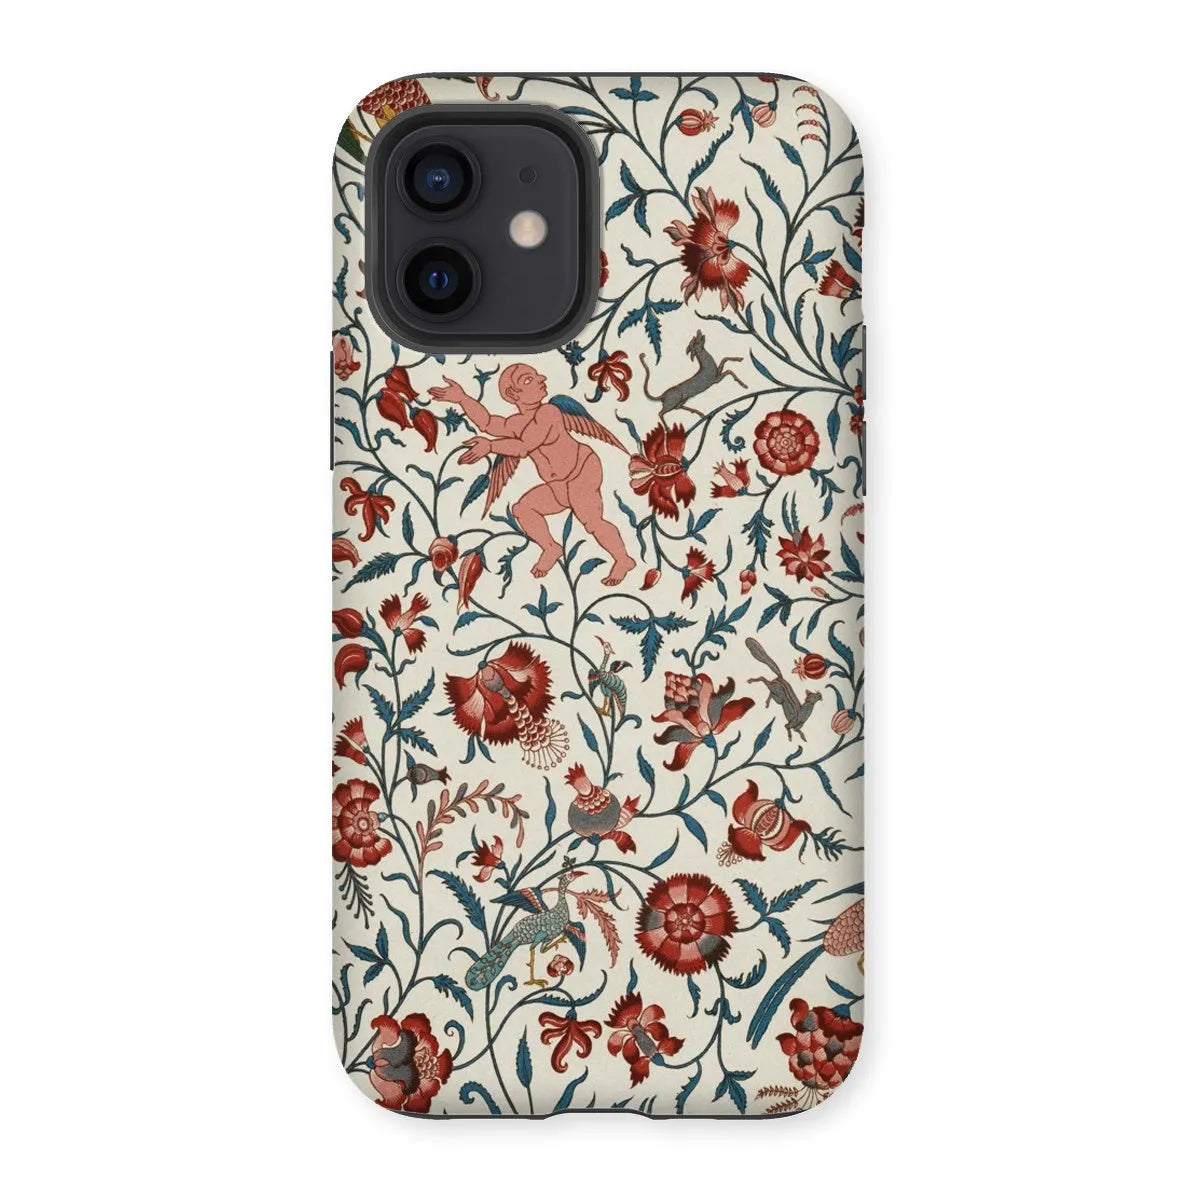 Persian Pattern From L’ornement Polychrome By Auguste Racinet Tough Phone Case - Iphone 12 / Matte - Mobile Phone